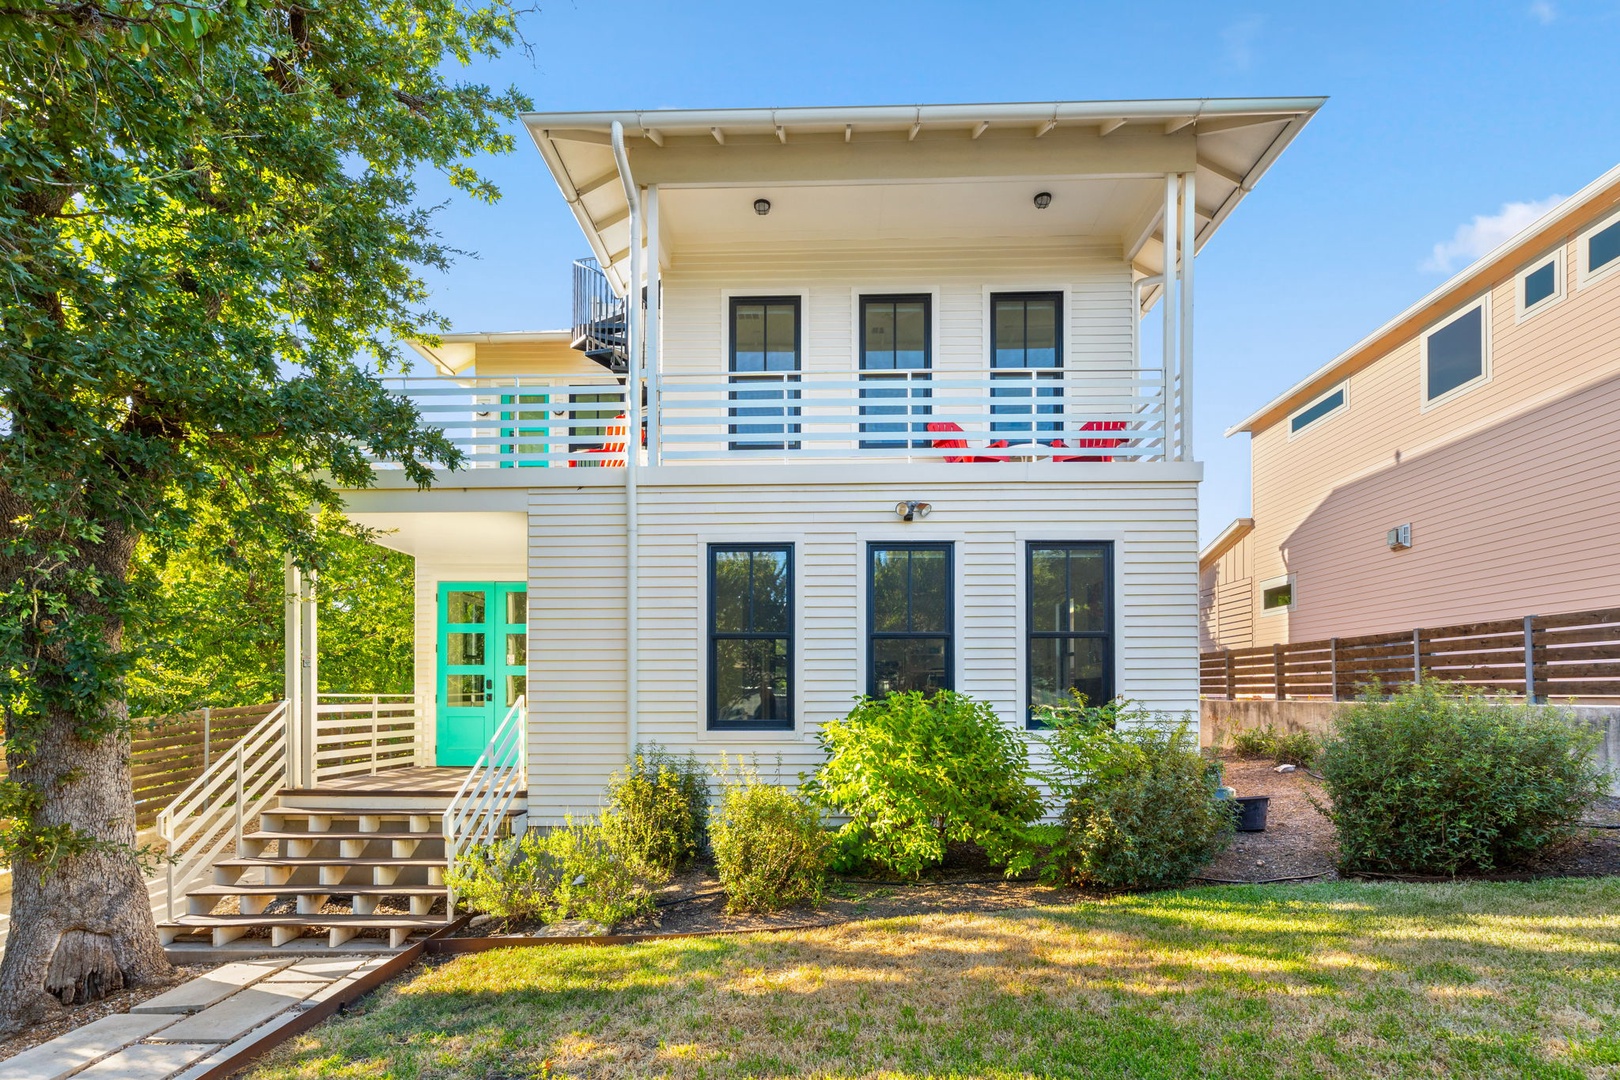 East Side Modern - 3 bedroom near downtown Austin with rooftop deck